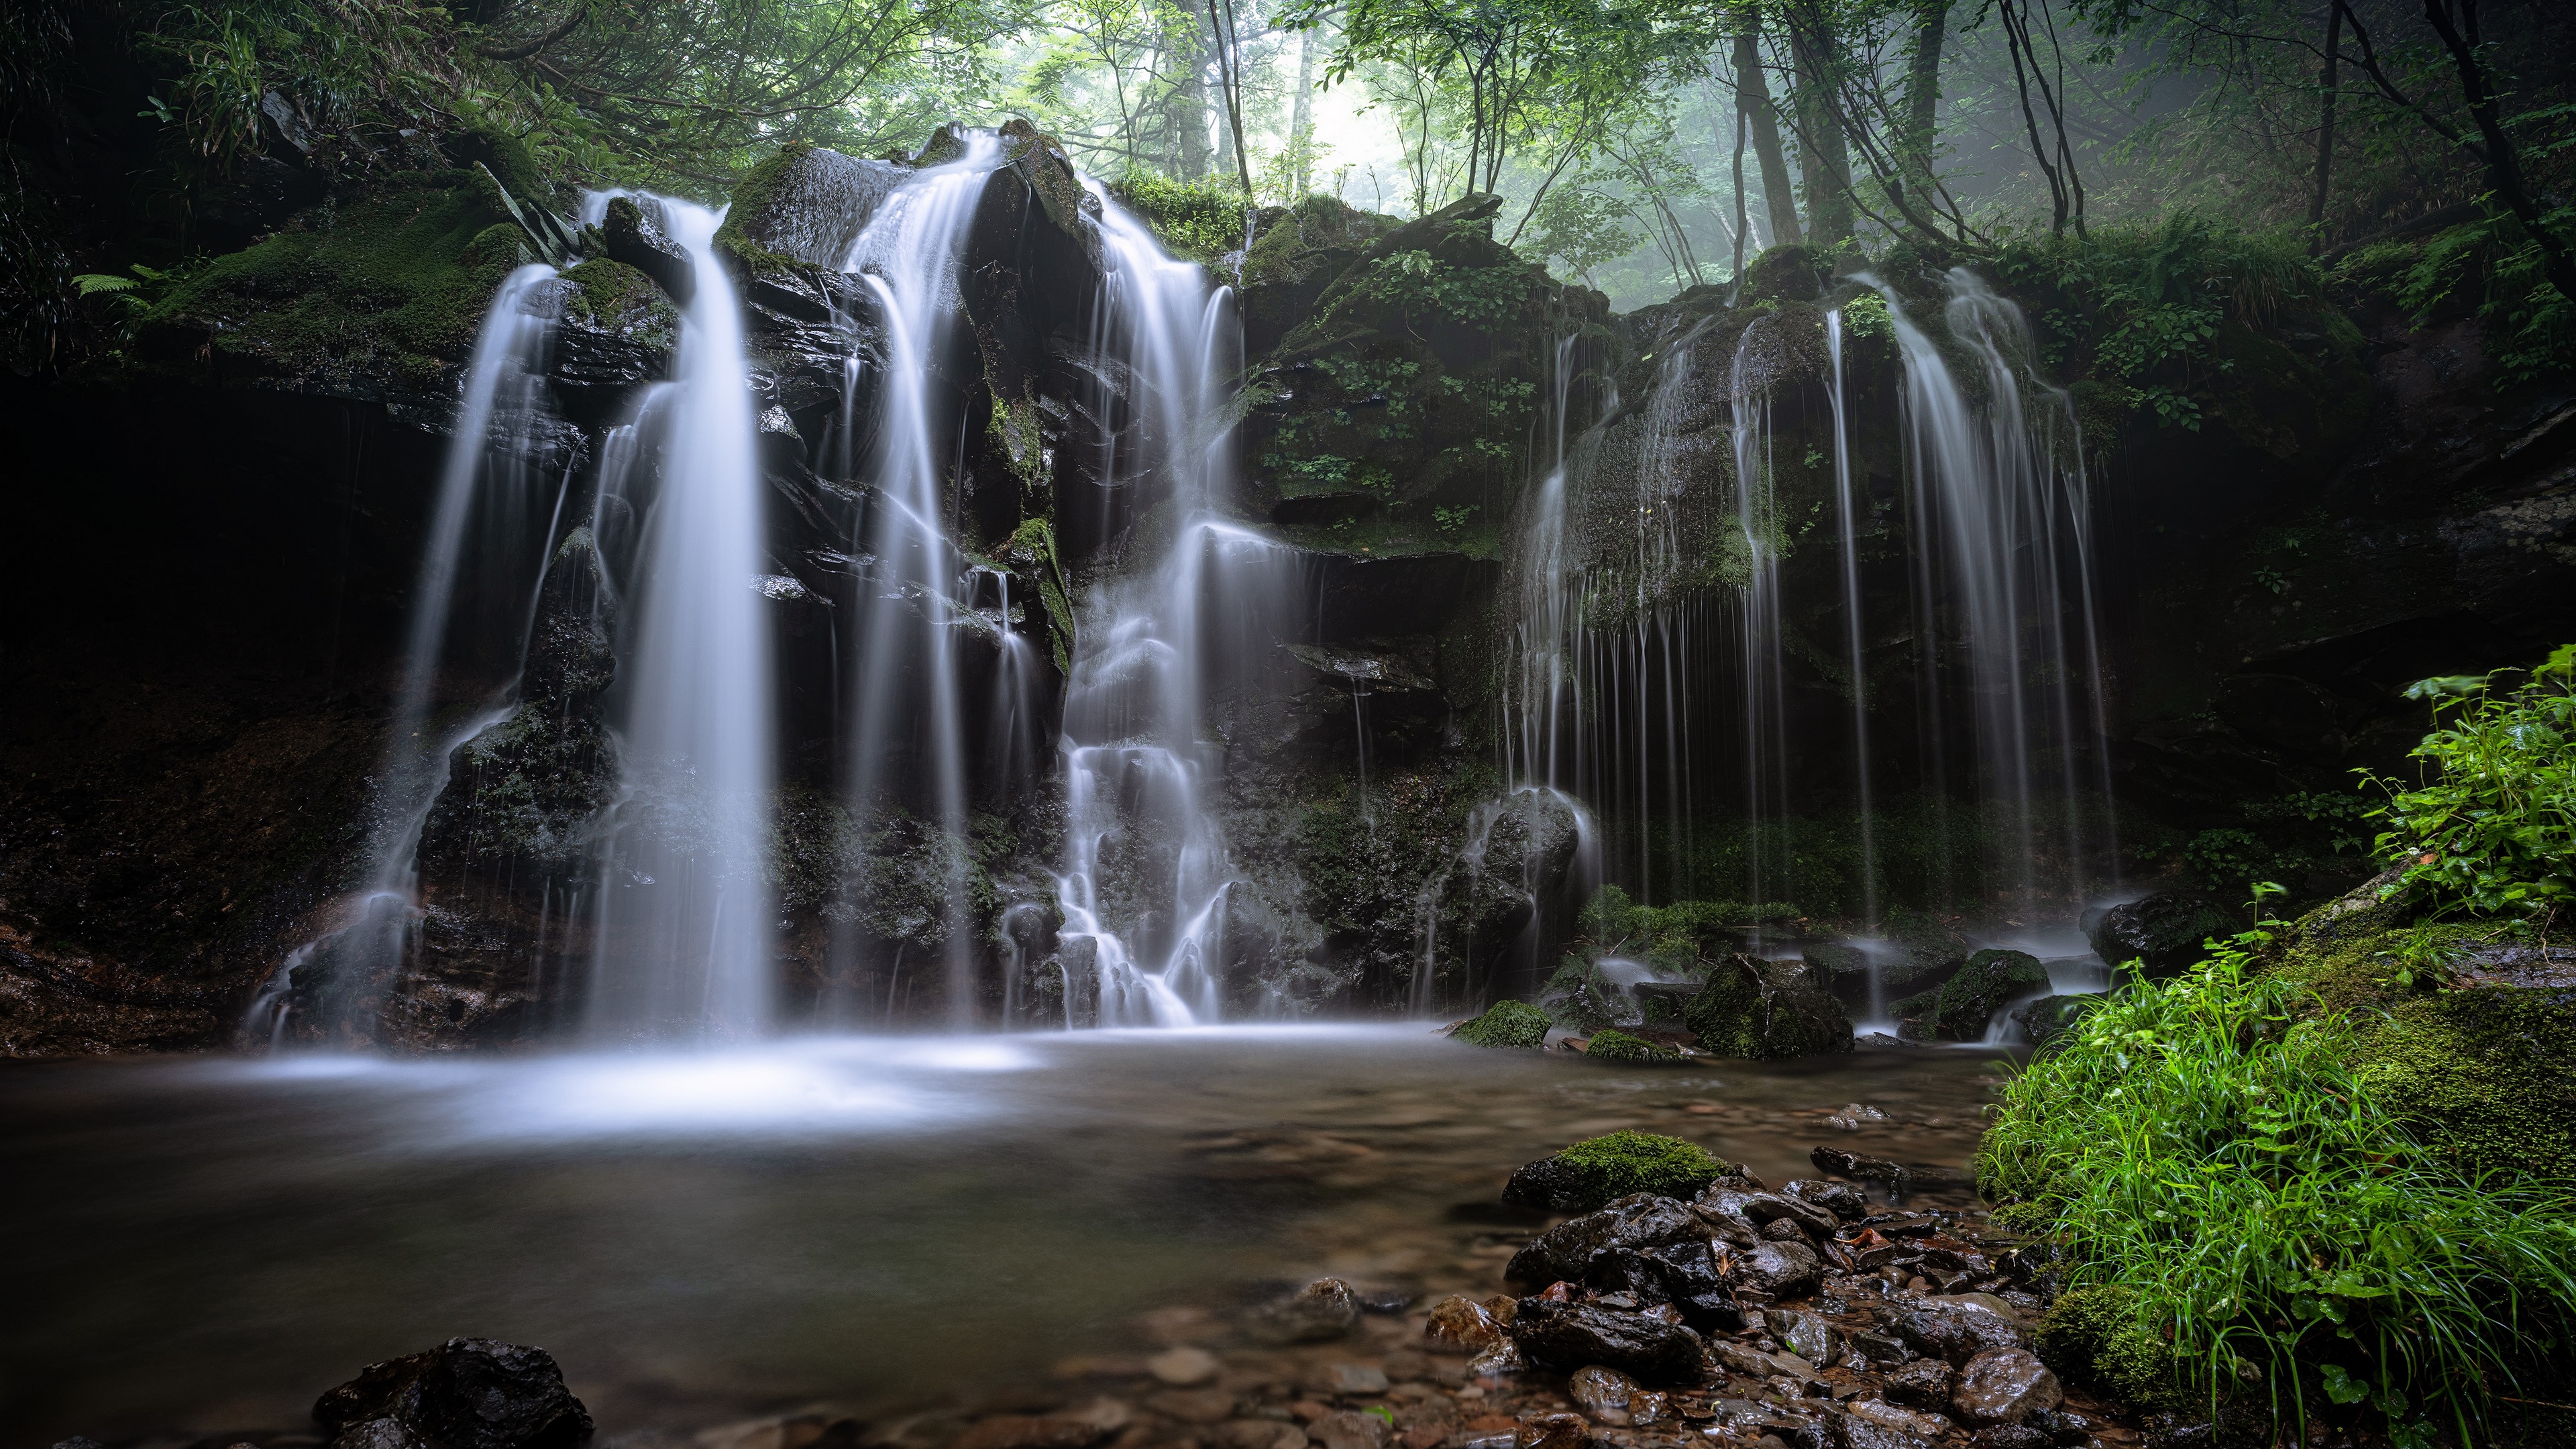 A waterfall in the forest in a rocky area